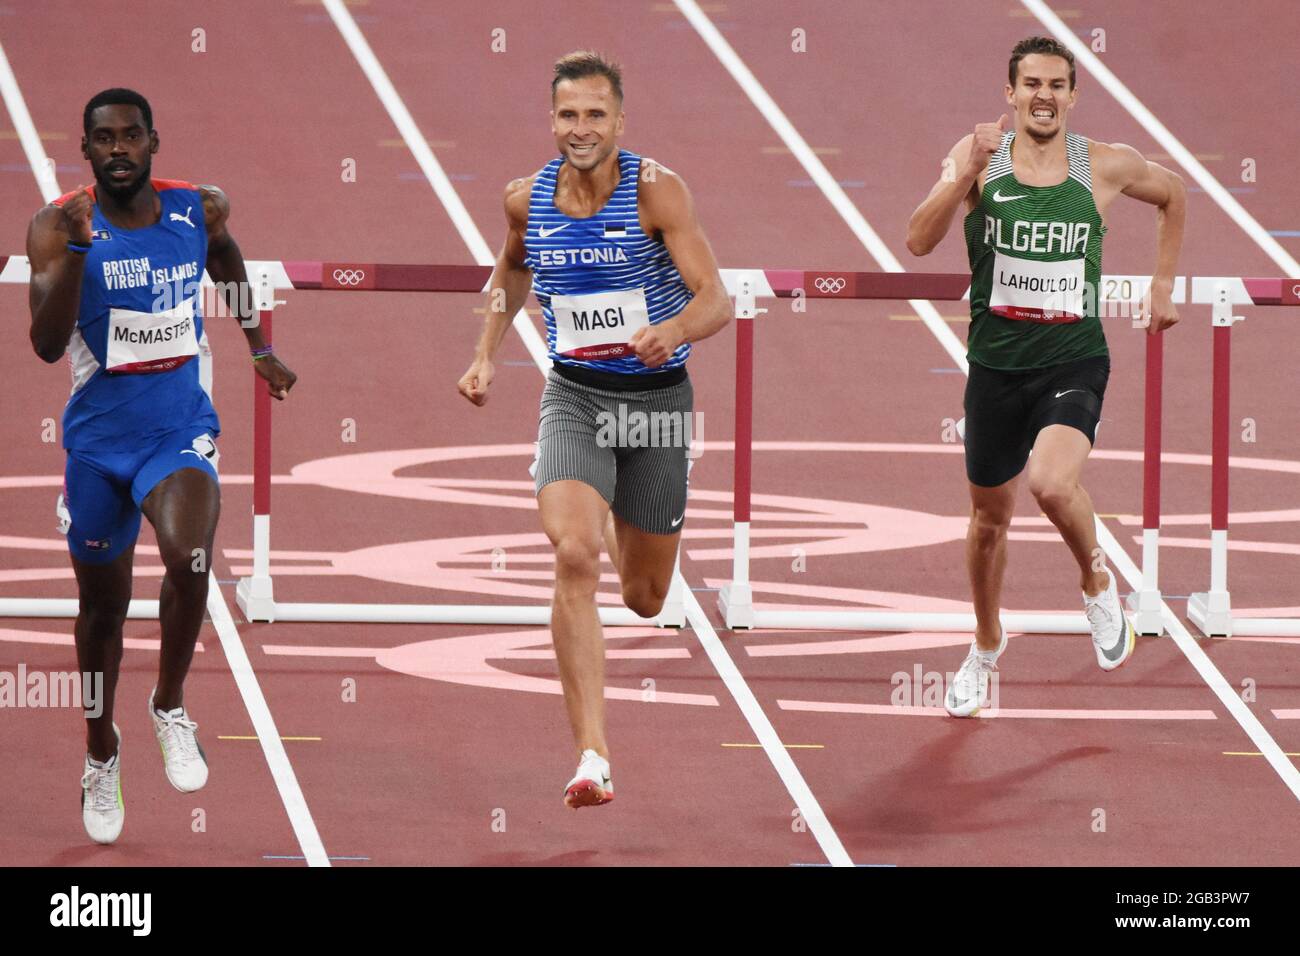 Kyron McMaster (IVB), Rasmus Magi (EST), Abdelmalik Lahoulou (ALG) compete on men's 400m hurdles semi-final, during the Olympic Games Tokyo 2020, Athletics, on August 1, 2021 at Tokyo Olympic Stadium in Tokyo, Japan - Photo Yoann Cambefort / Marti Media / DPPI Stock Photo